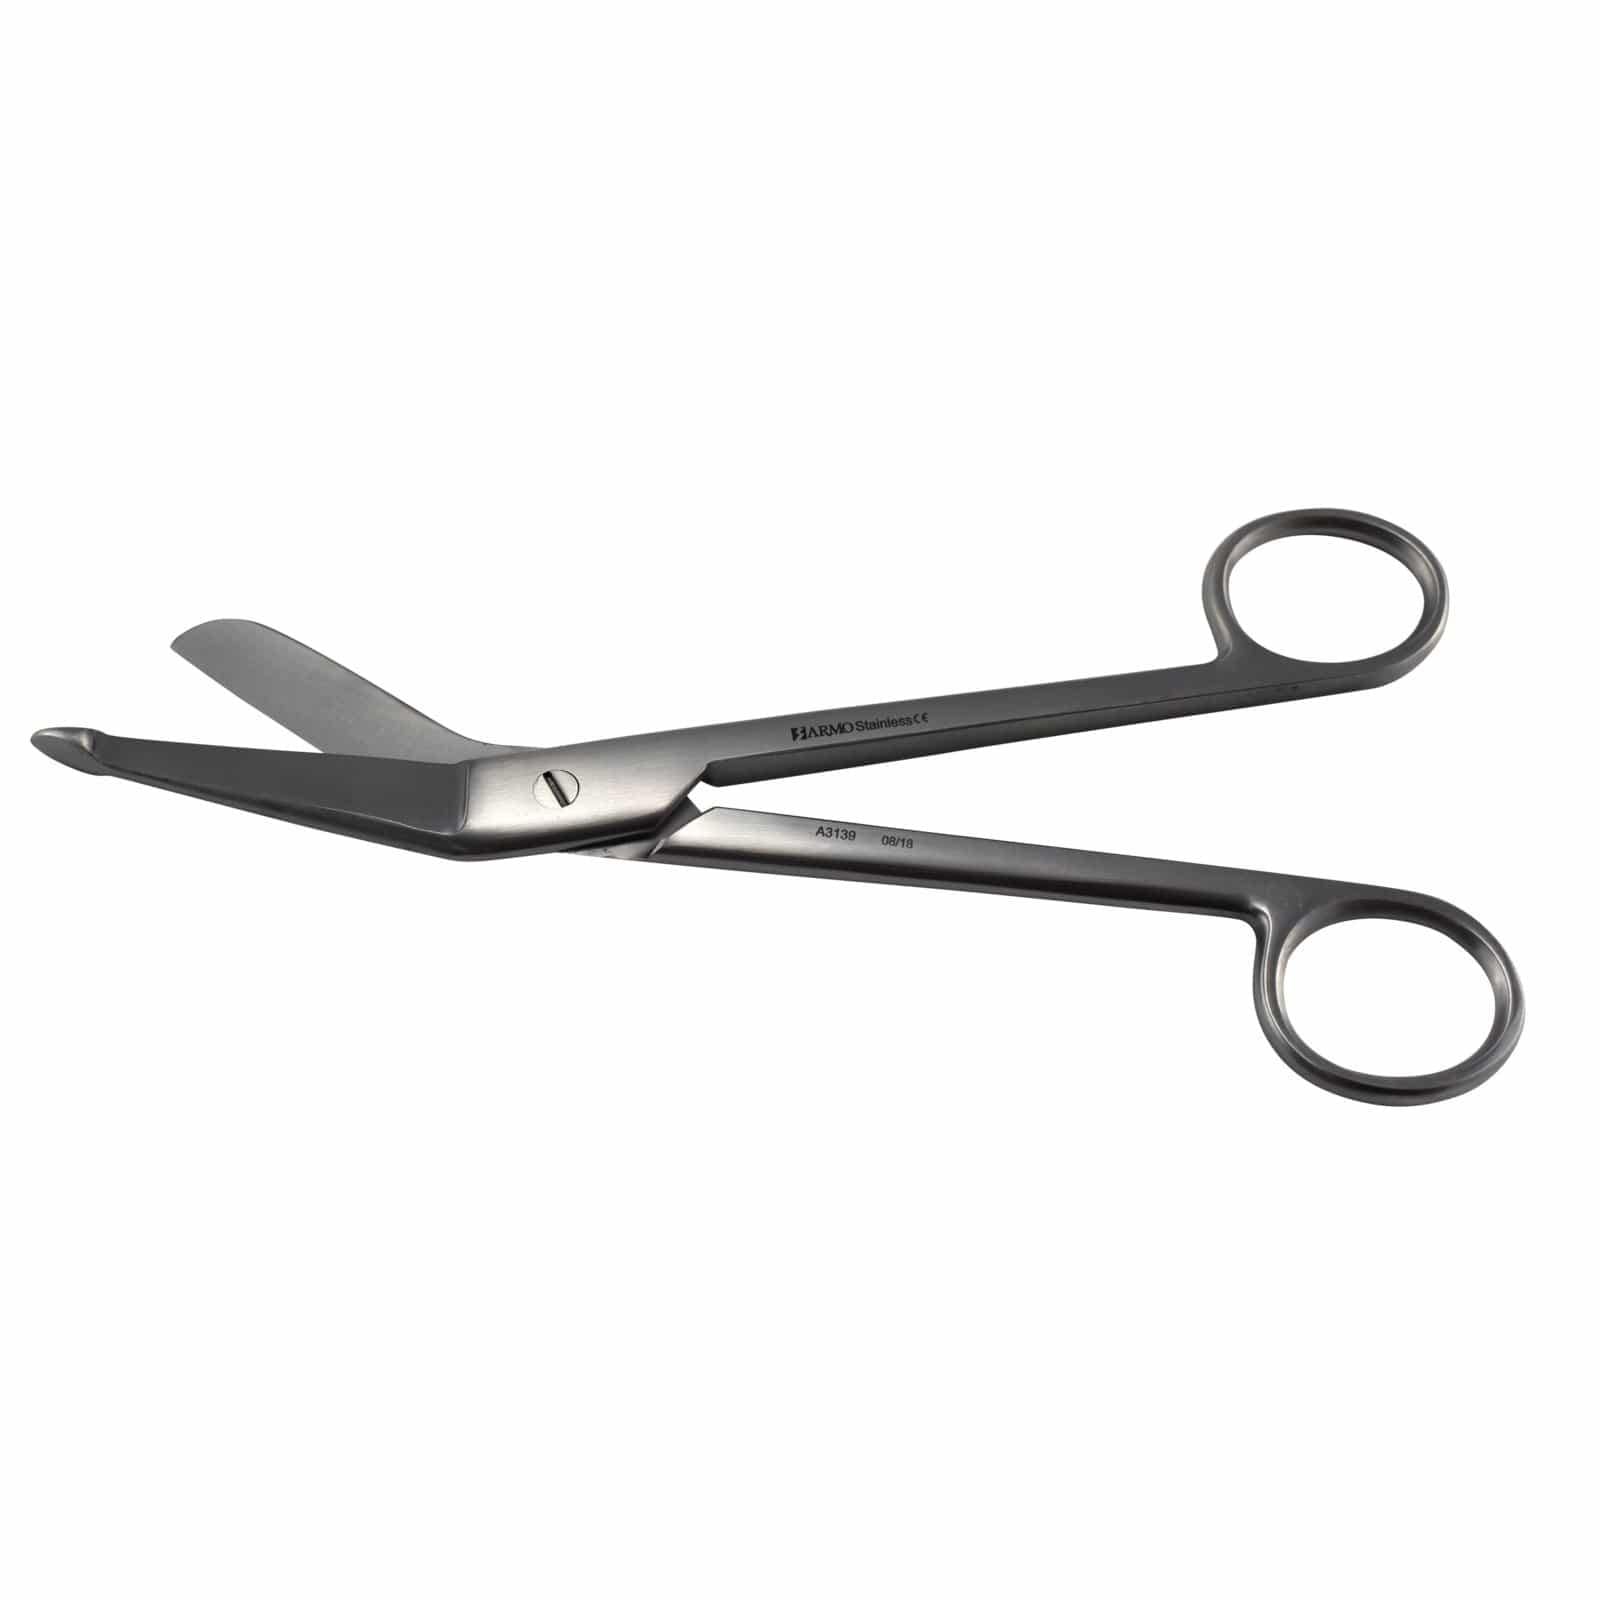 Armo Surgical Instruments 18cm Armo Scissors Bandage Lister